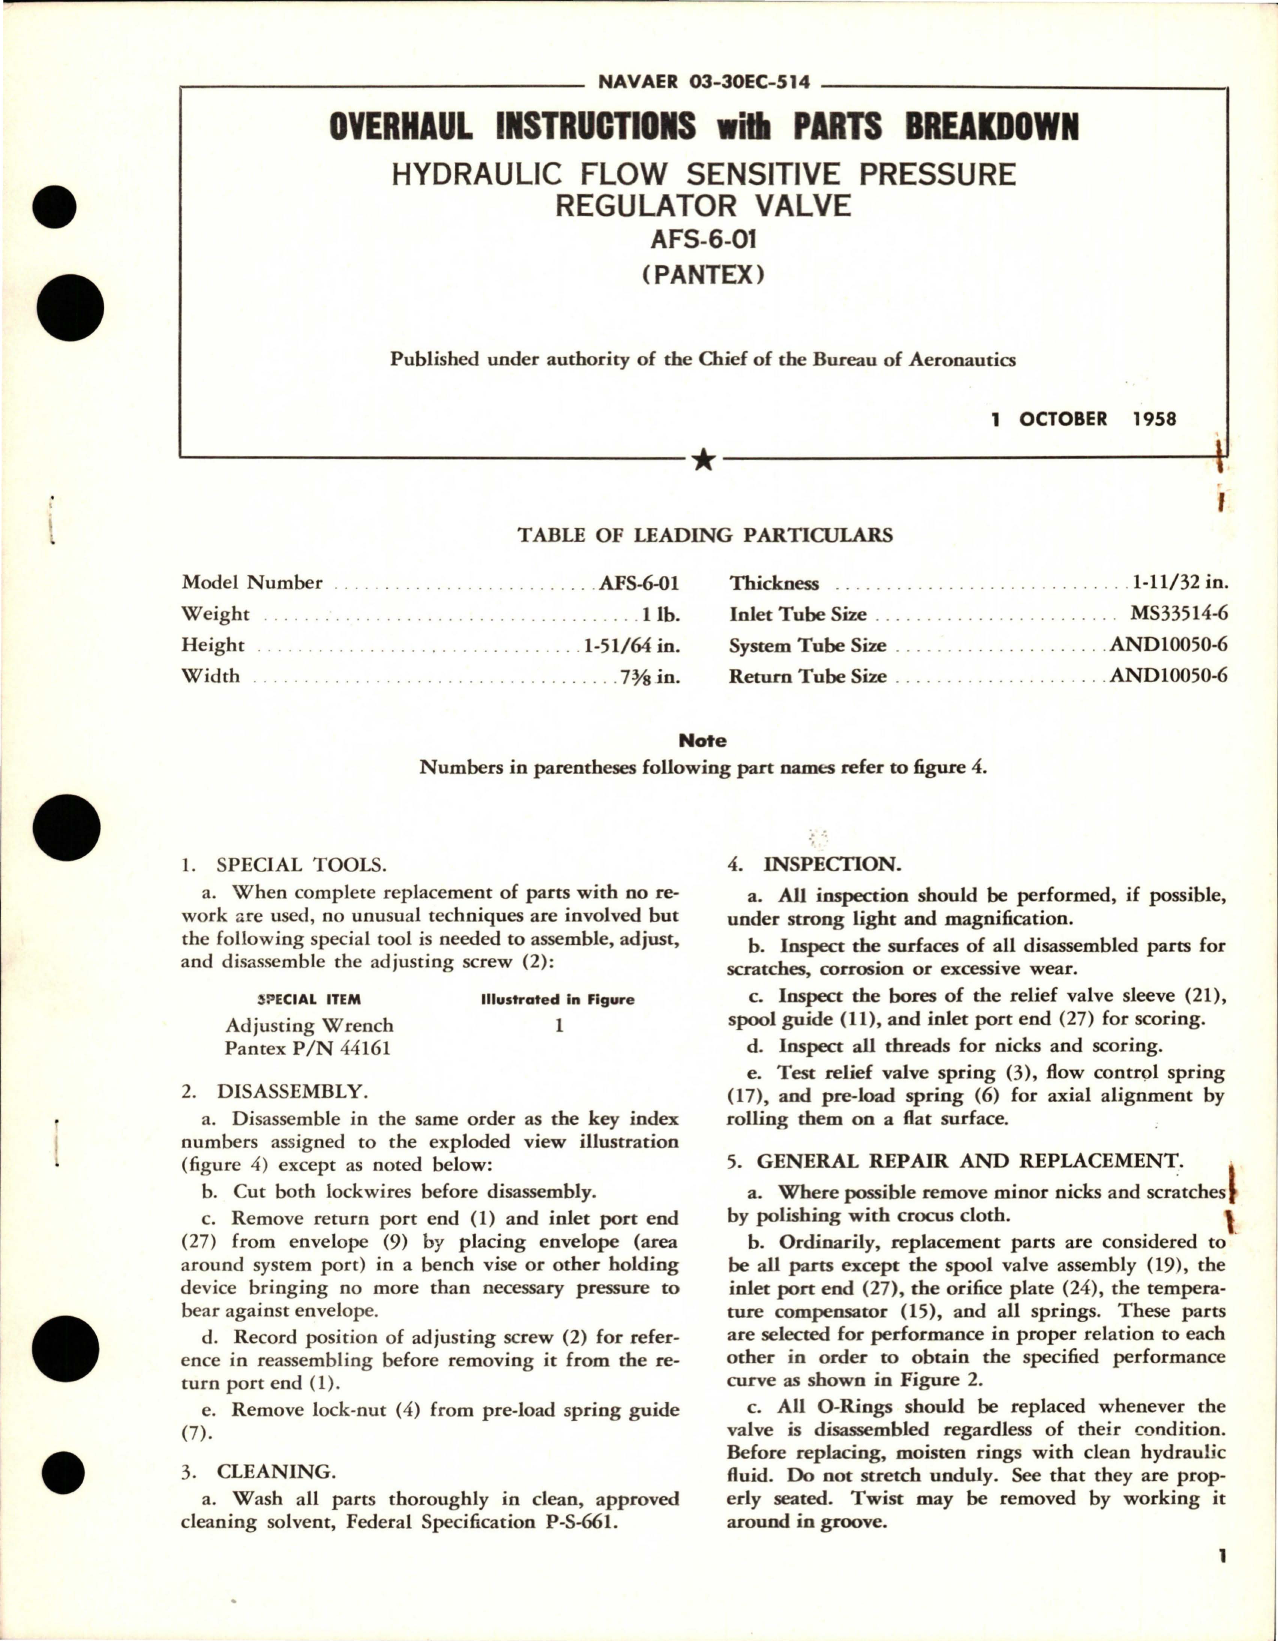 Sample page 1 from AirCorps Library document: Overhaul Instructions with Parts for Hydraulic Flow Sensitive Pressure Regulator Valve - AFS-6-01